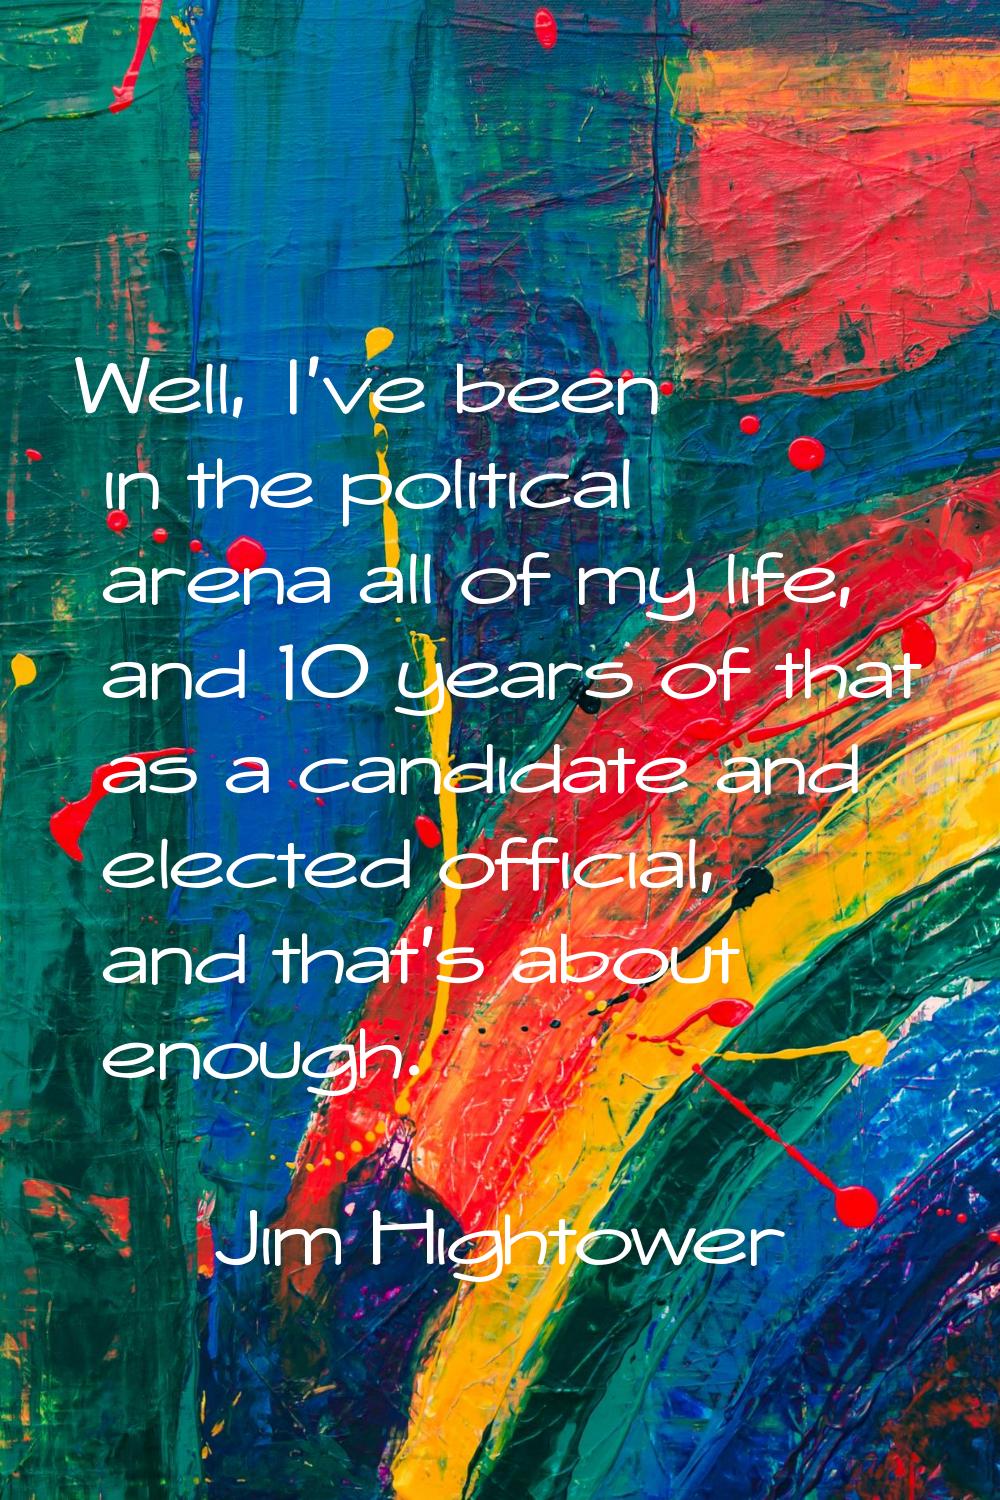 Well, I've been in the political arena all of my life, and 10 years of that as a candidate and elec